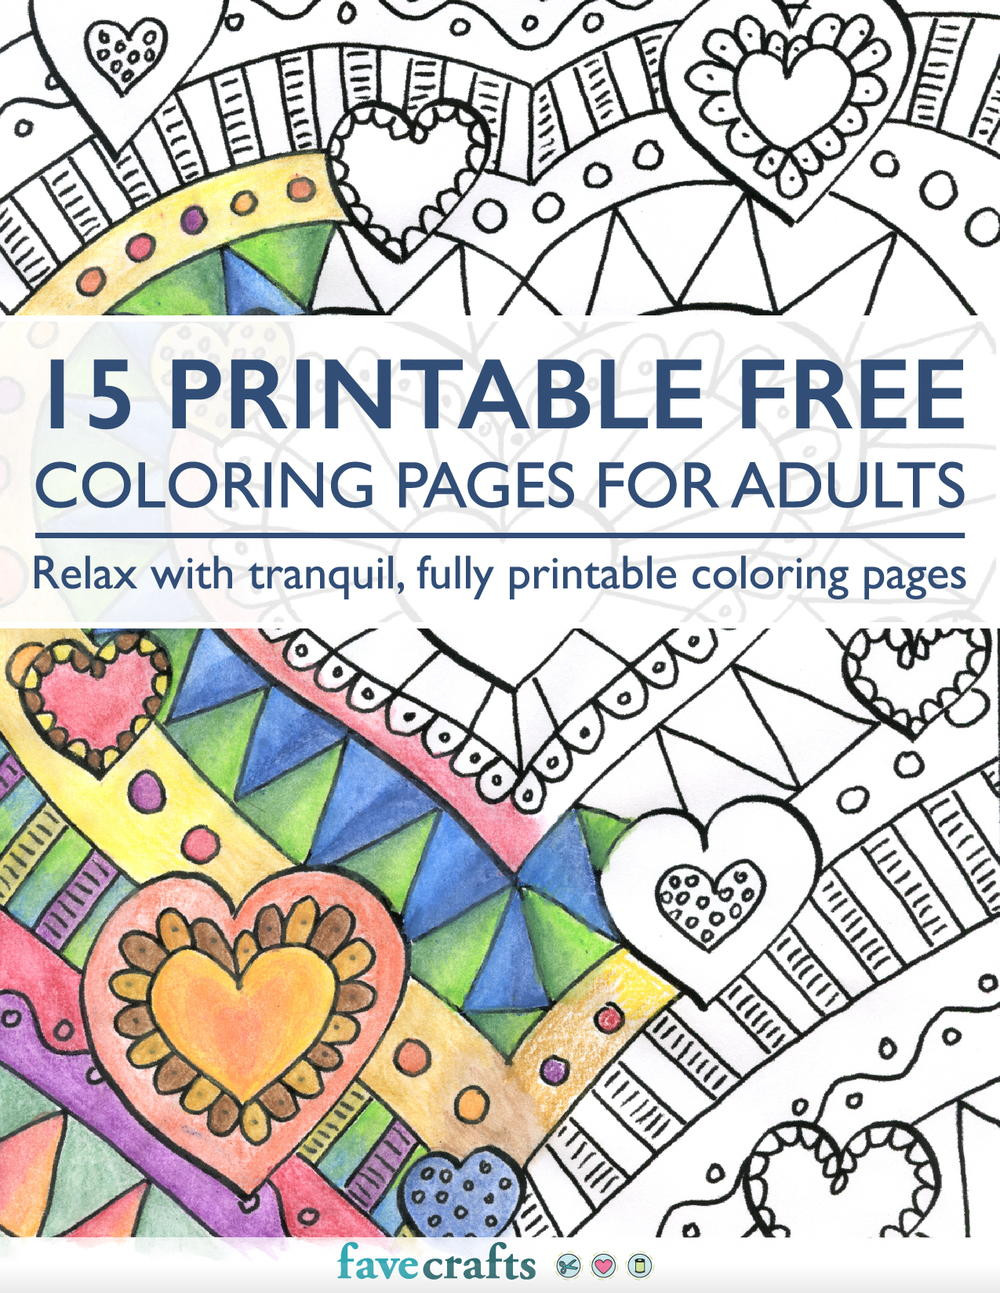 Large Print Adult Coloring Books
 15 Printable Free Coloring Pages for Adults free eBook